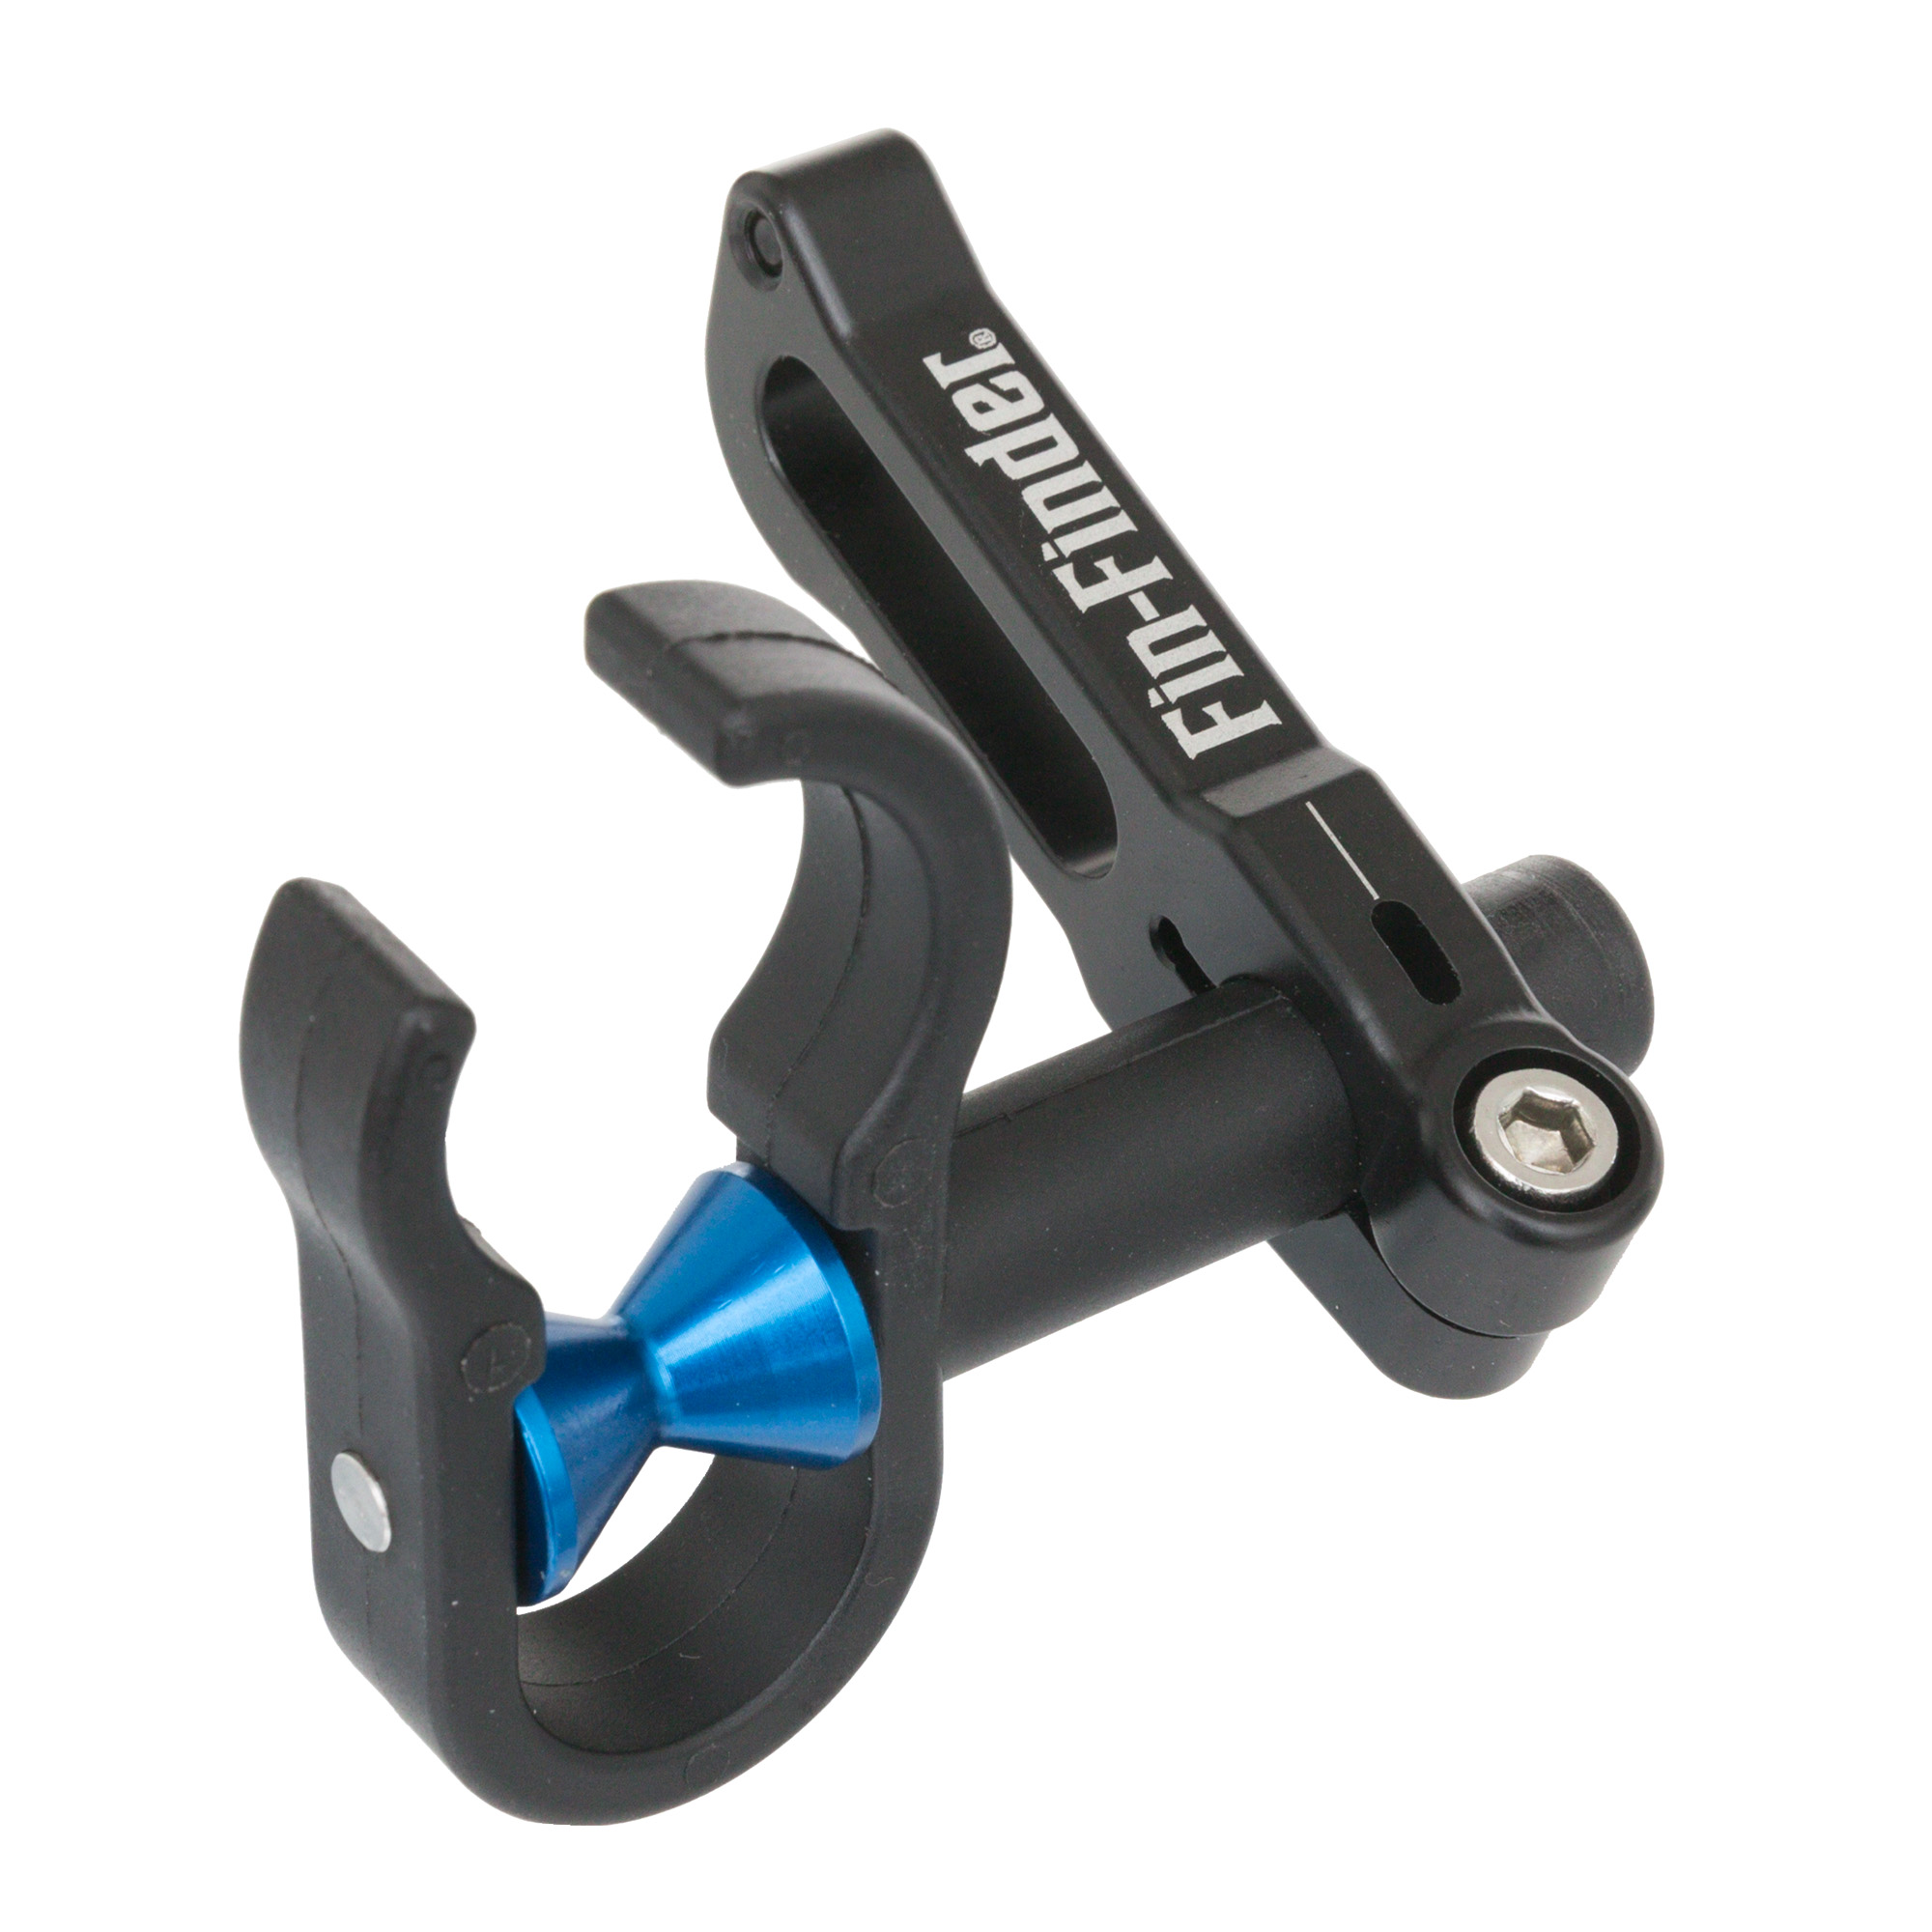 Fin-Finder Hydro-Glide Pro Rest - Stainless